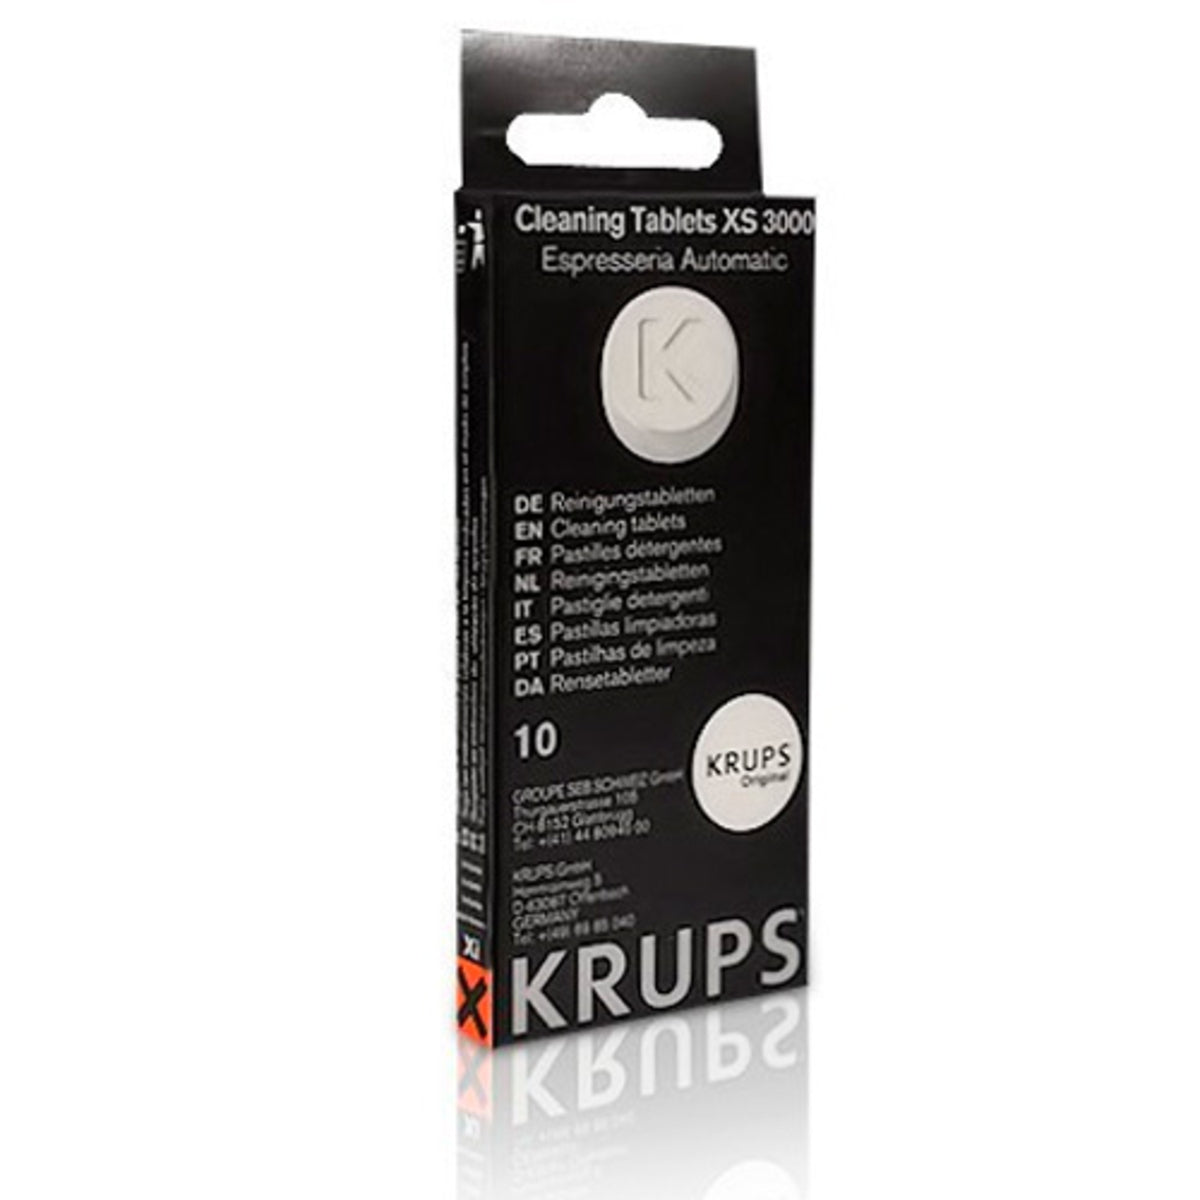 Krups Coffee Maker, Espresso Machine, Cleaning Tablet Pack P/N: XS3000,  KAXS300010